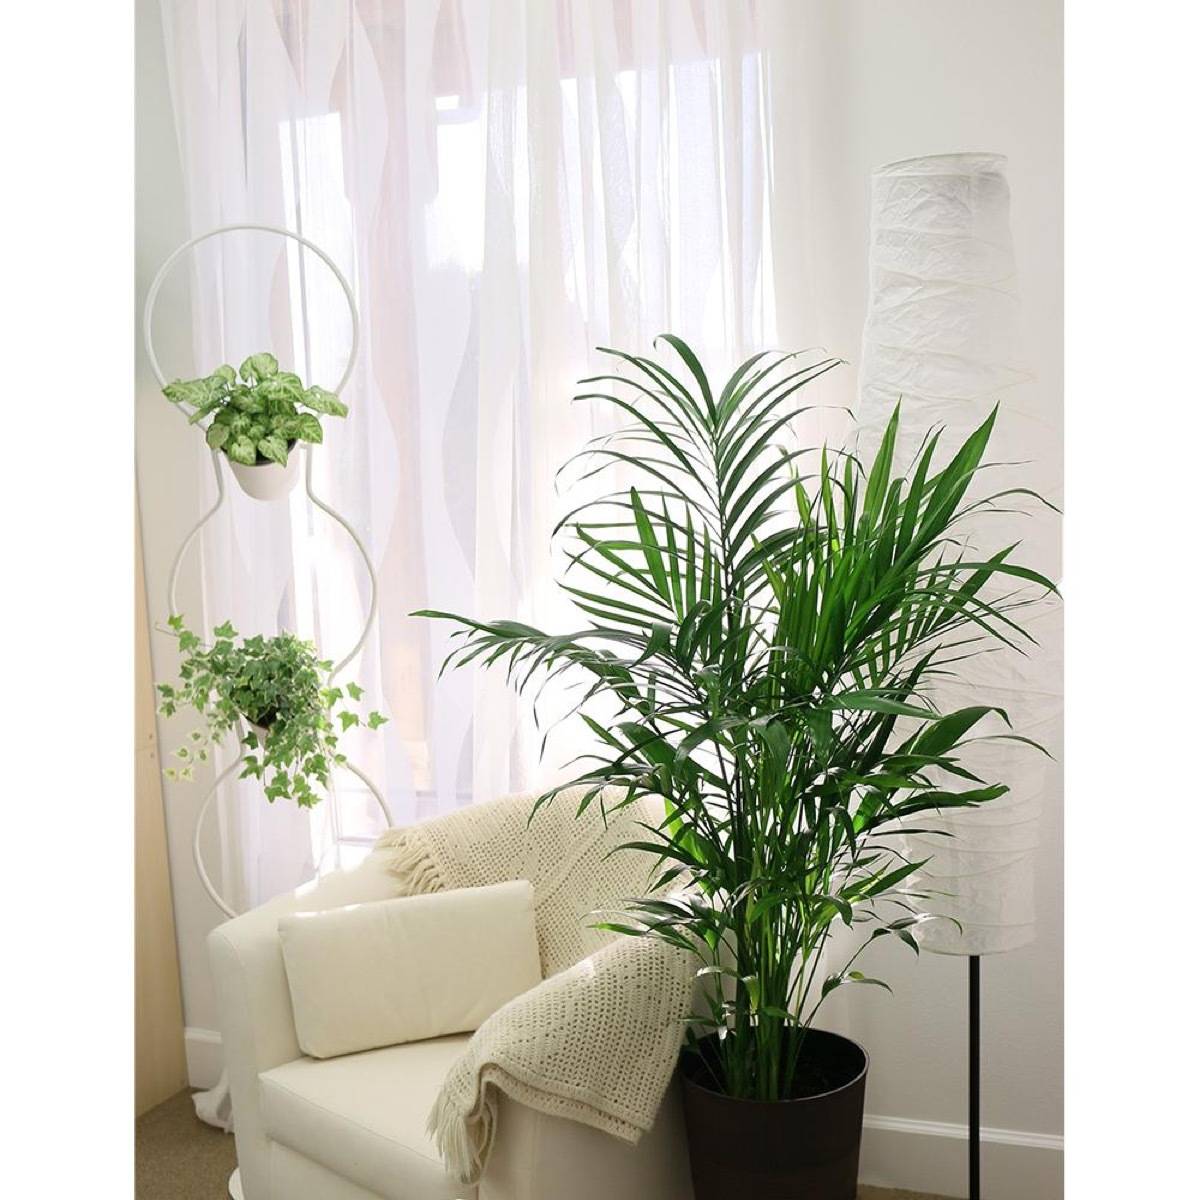 Do your houseplant shopping online: The Home Depot